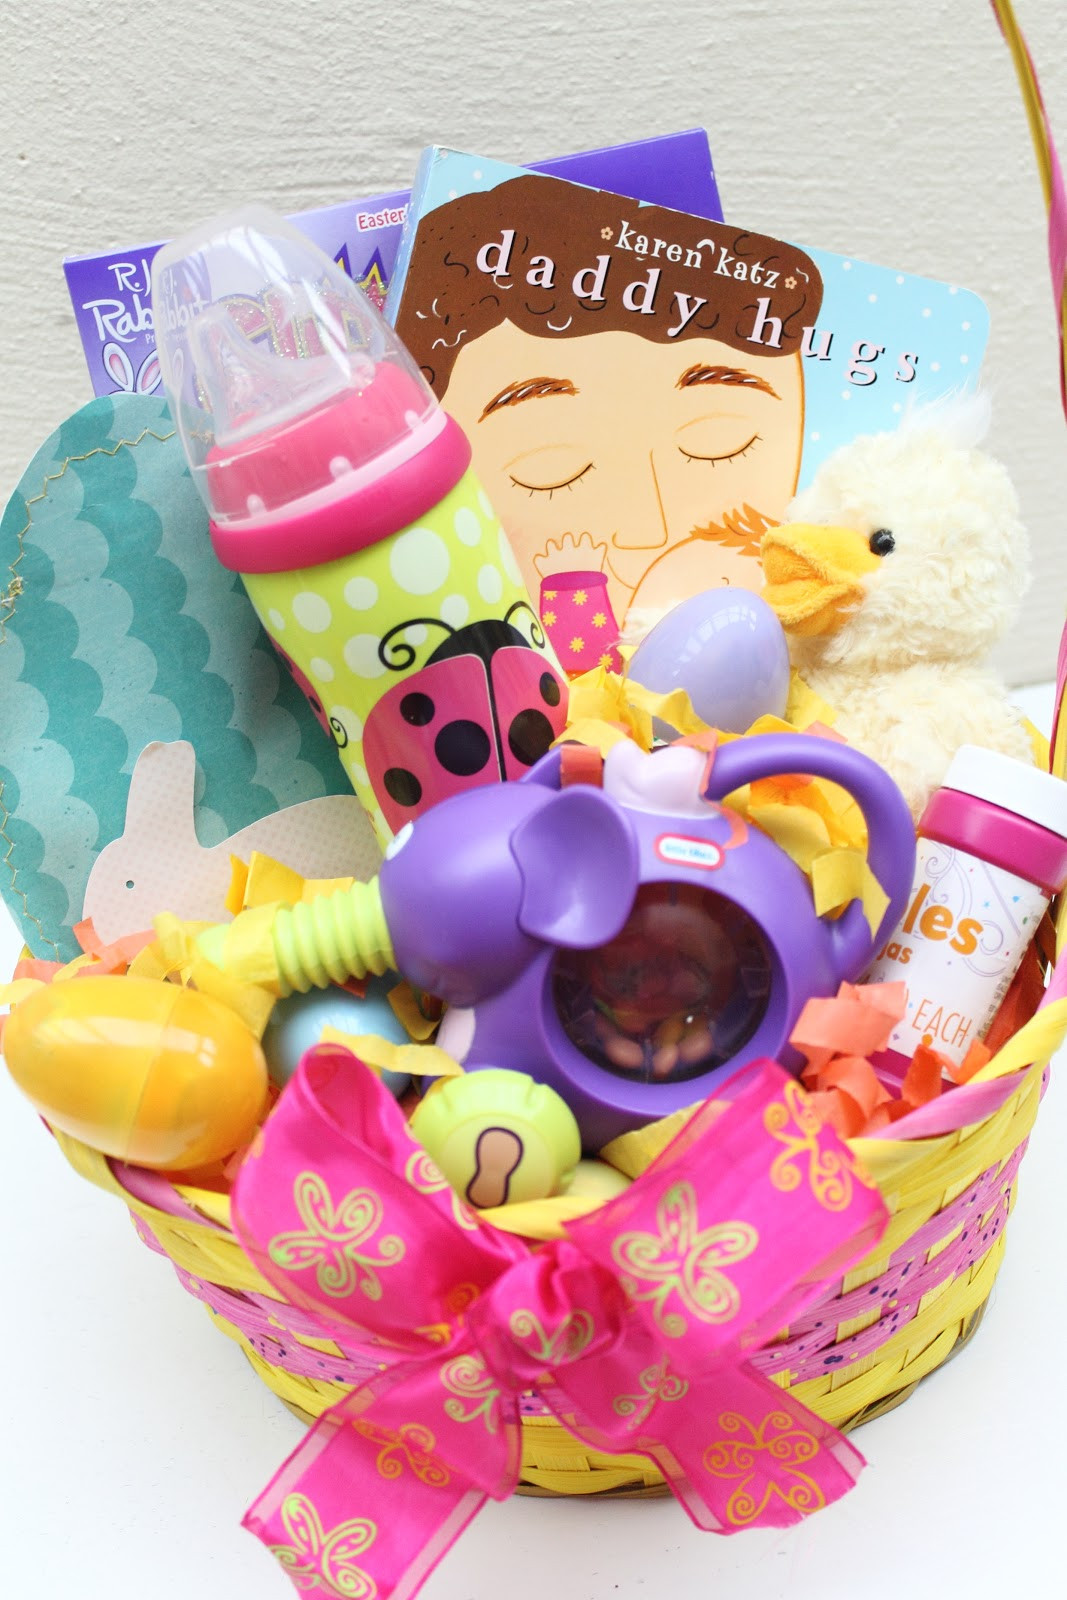 Easter Gift Ideas For Girlfriend
 Make it Cozee Pool Fun Easter Baskets